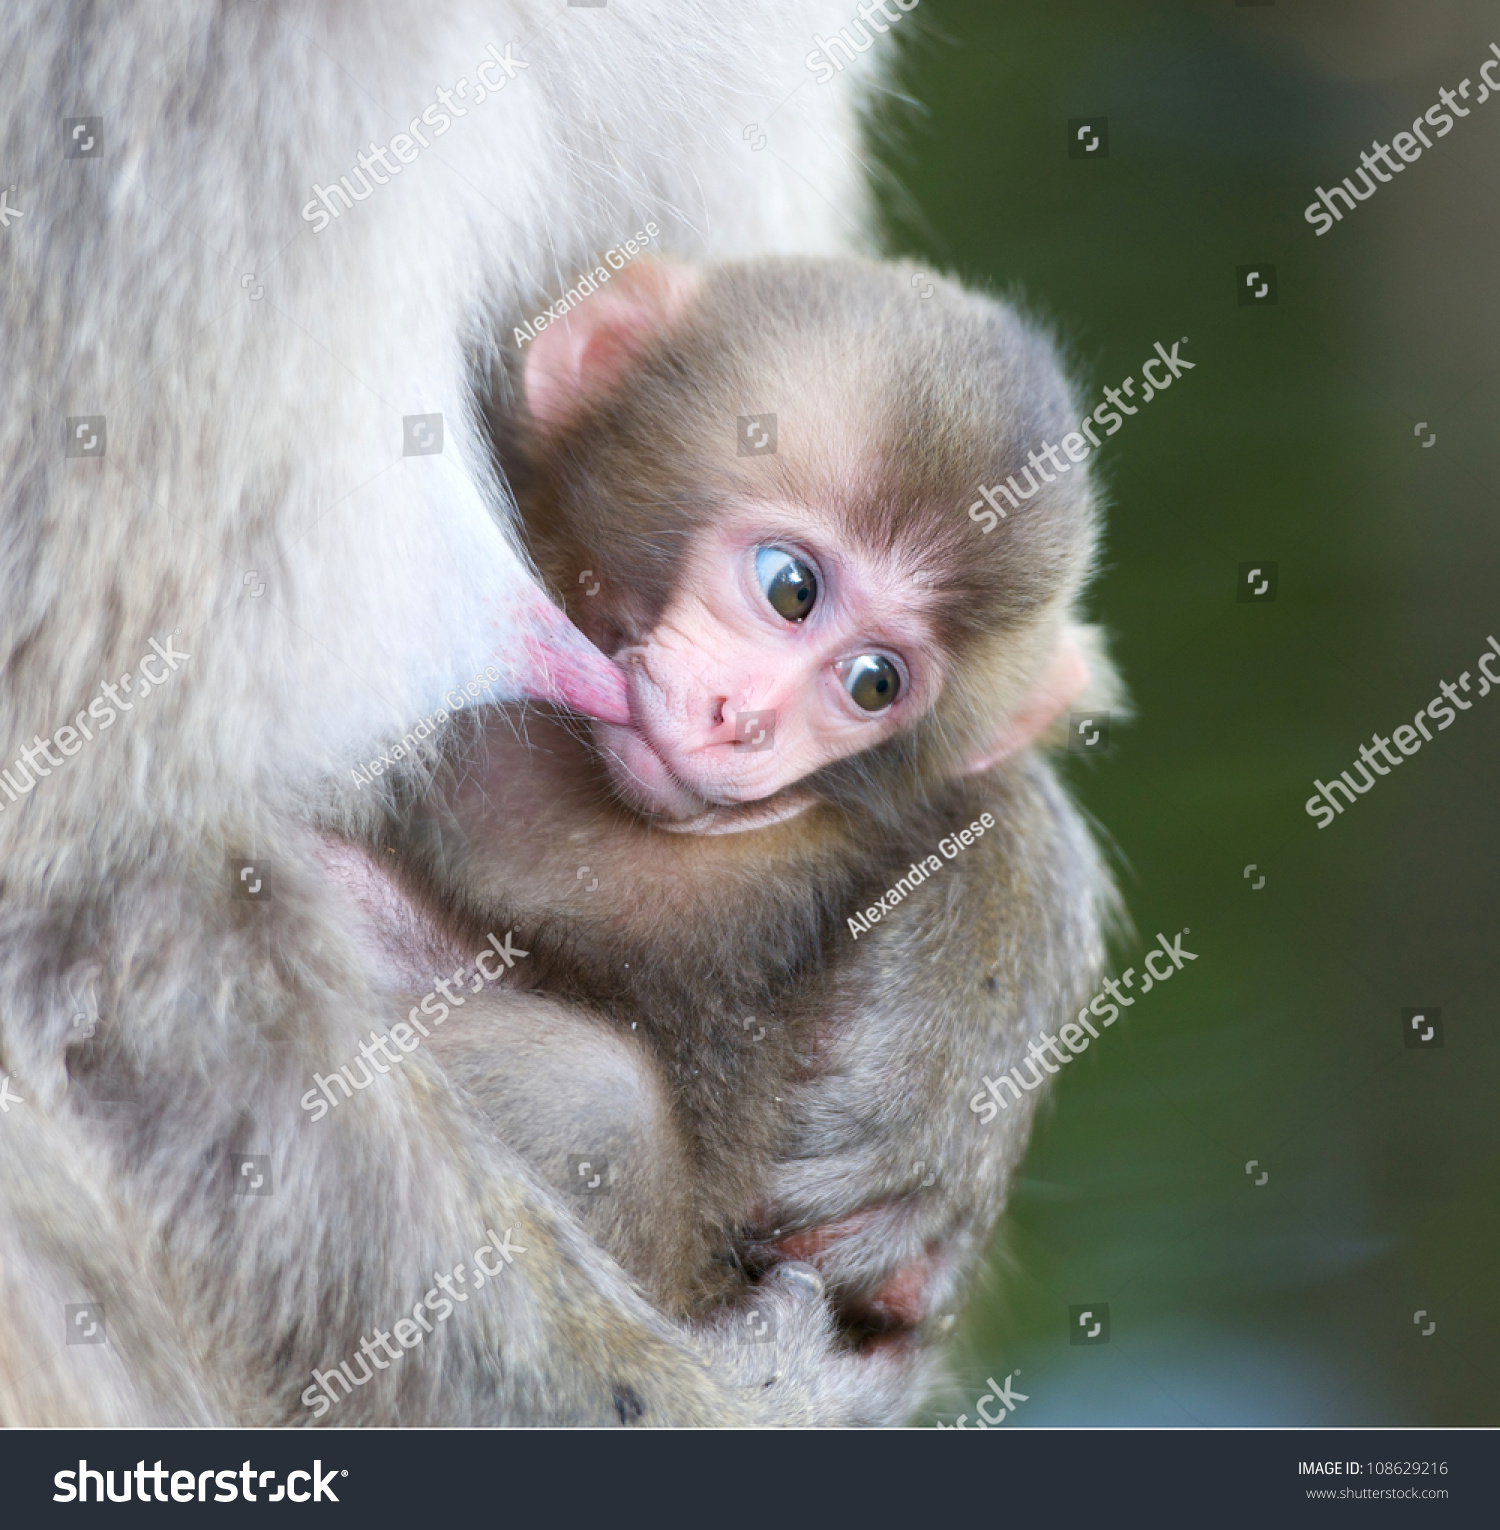 stock-photo-a-macaque-baby-sucking-on-mother-s-teat-108629216.jpg